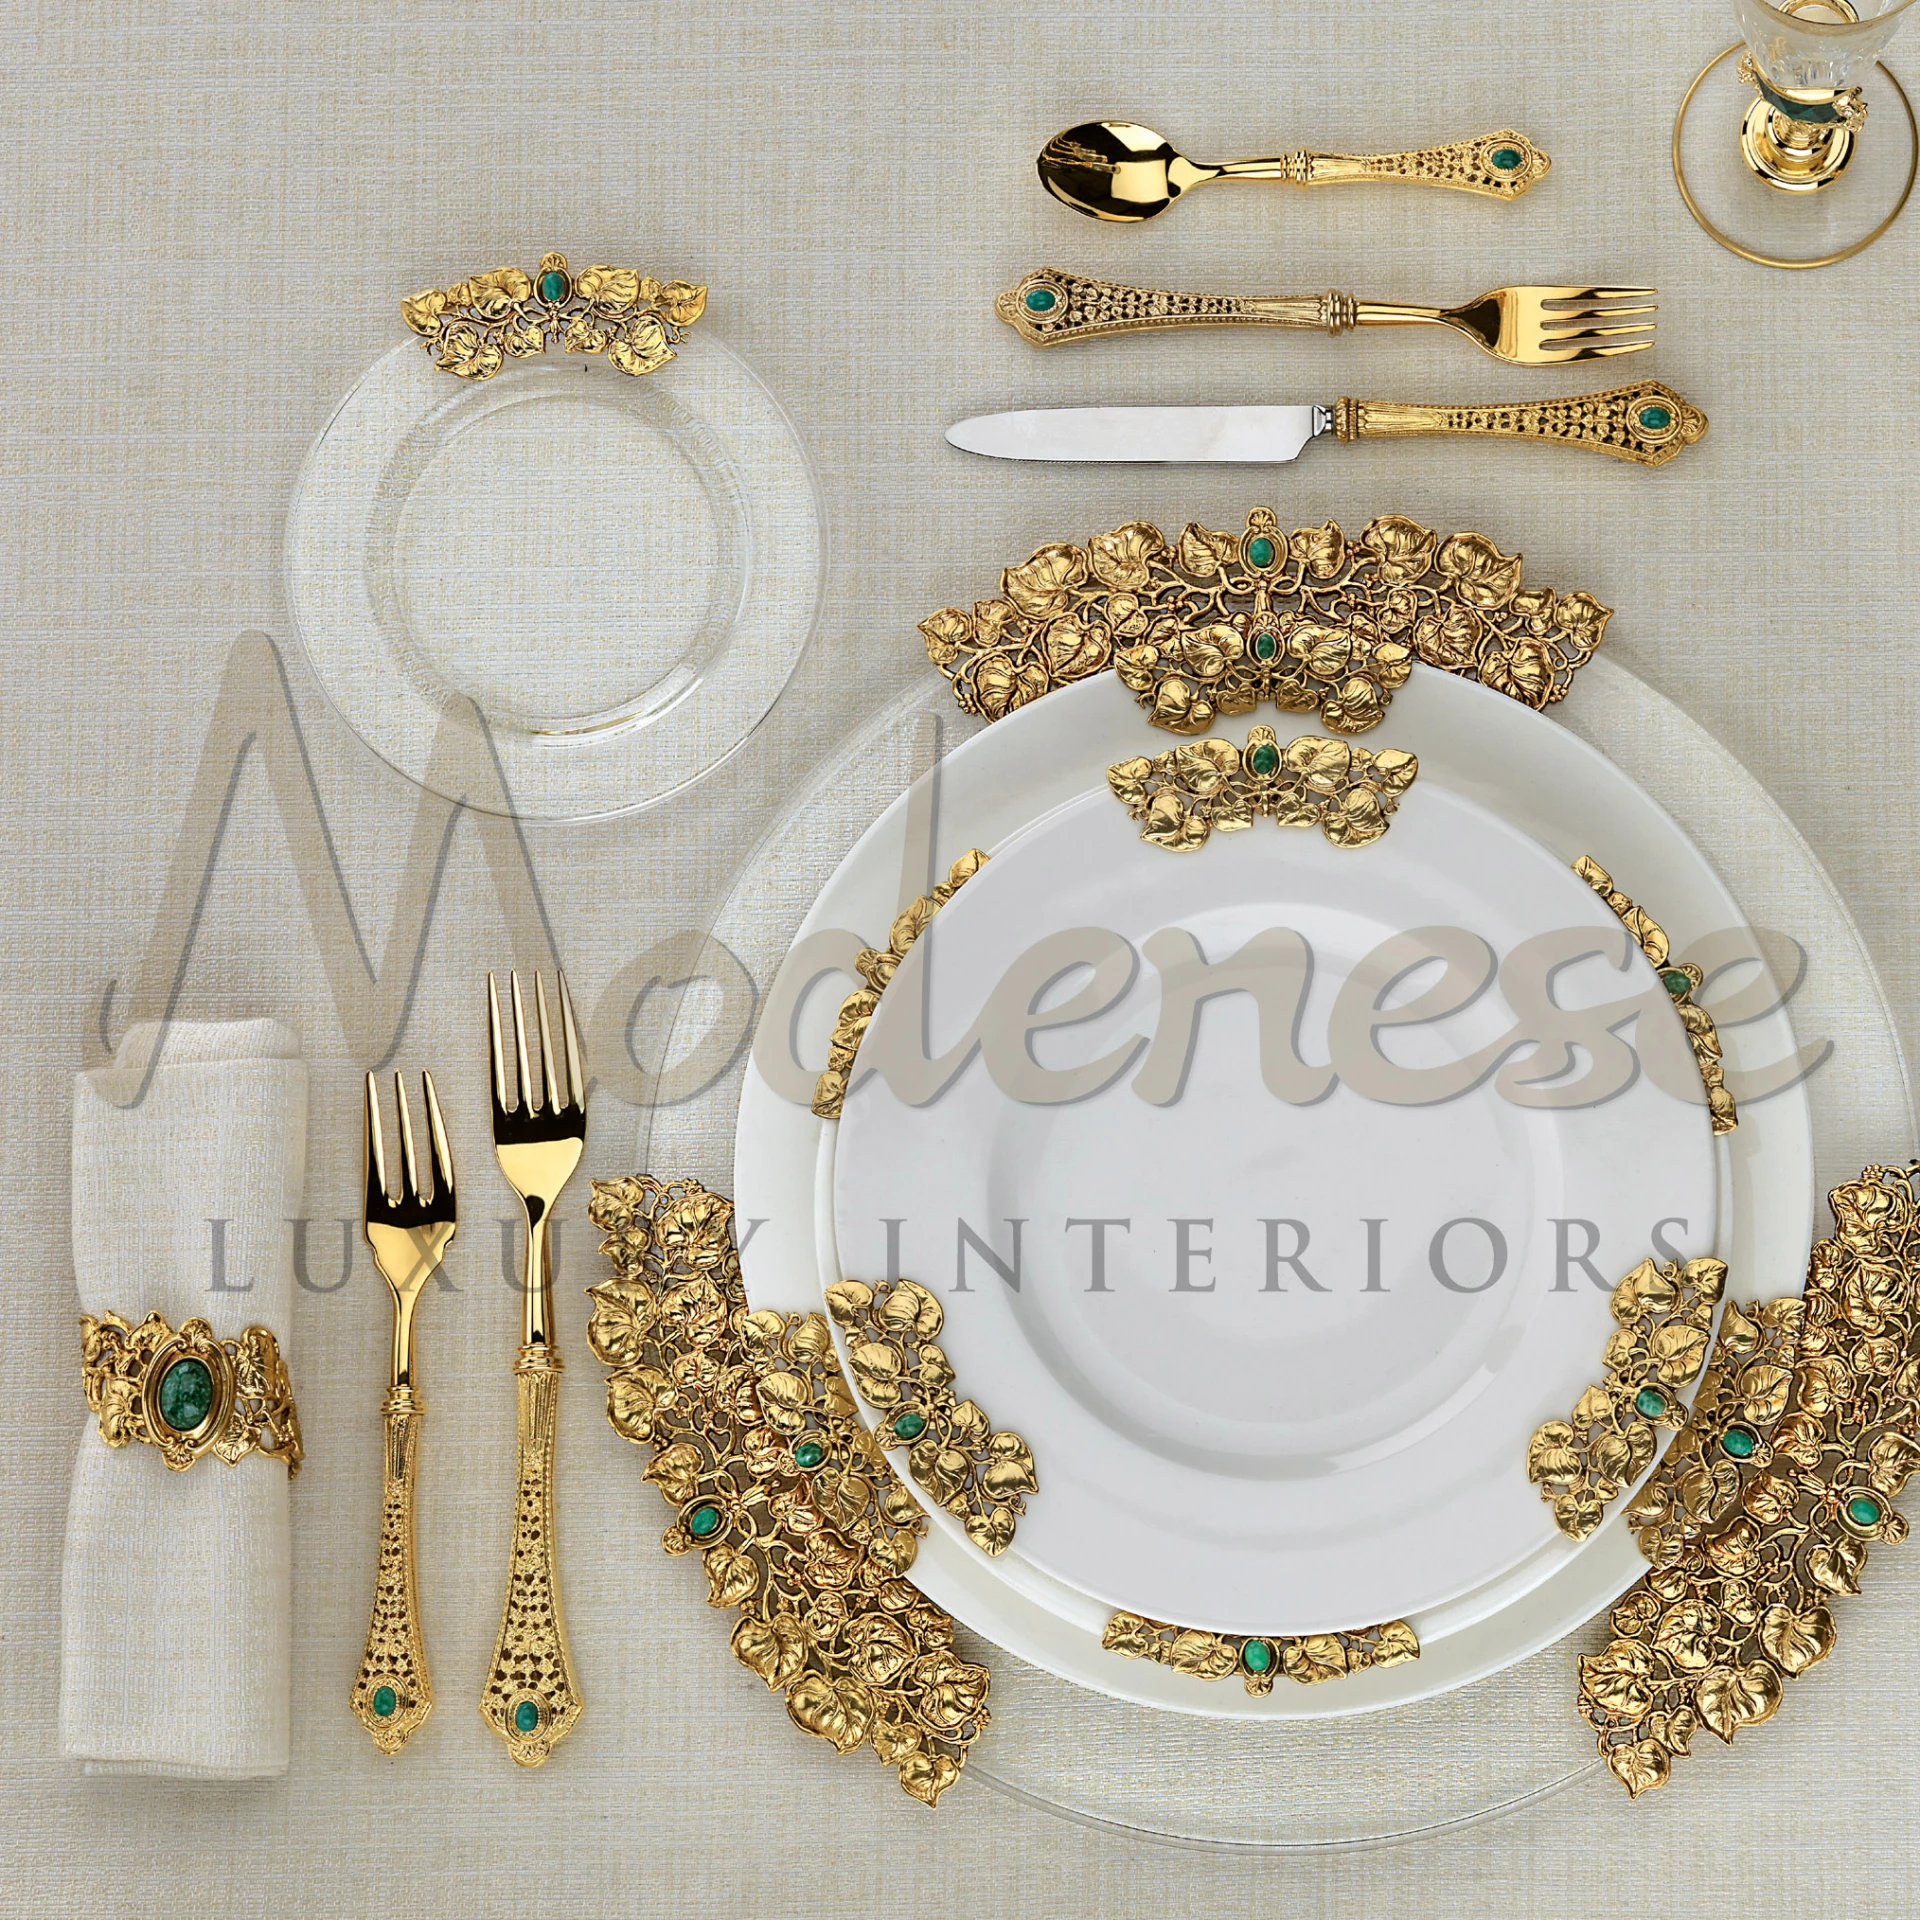 Luxurious decorative charger plate set with gold ornate cutlery and green gemstone embellishments.